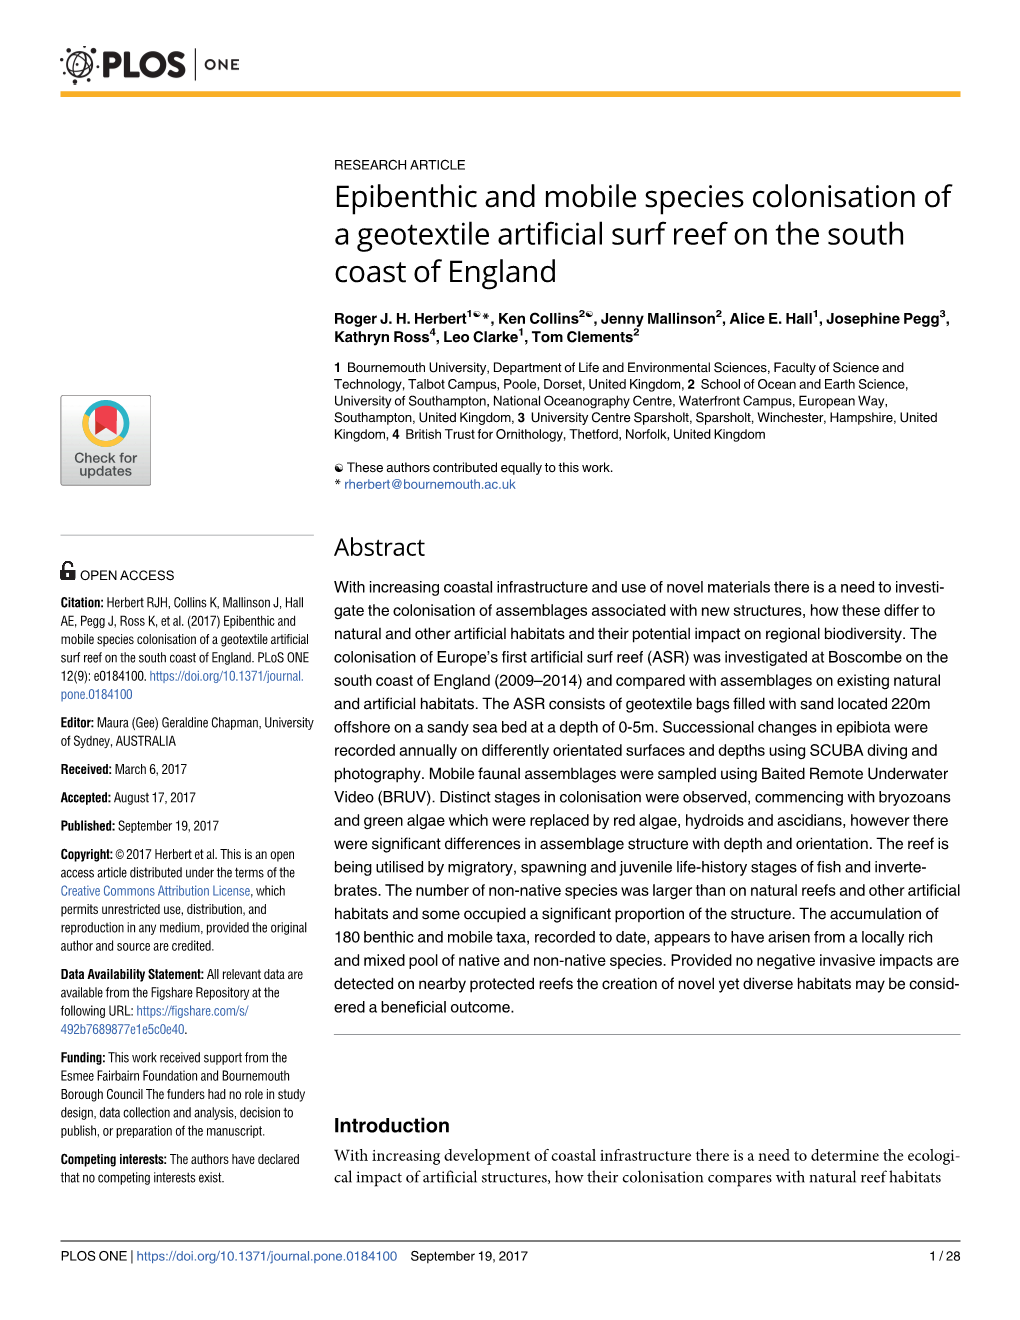 Epibenthic and Mobile Species Colonisation of a Geotextile Artificial Surf Reef on the South Coast of England